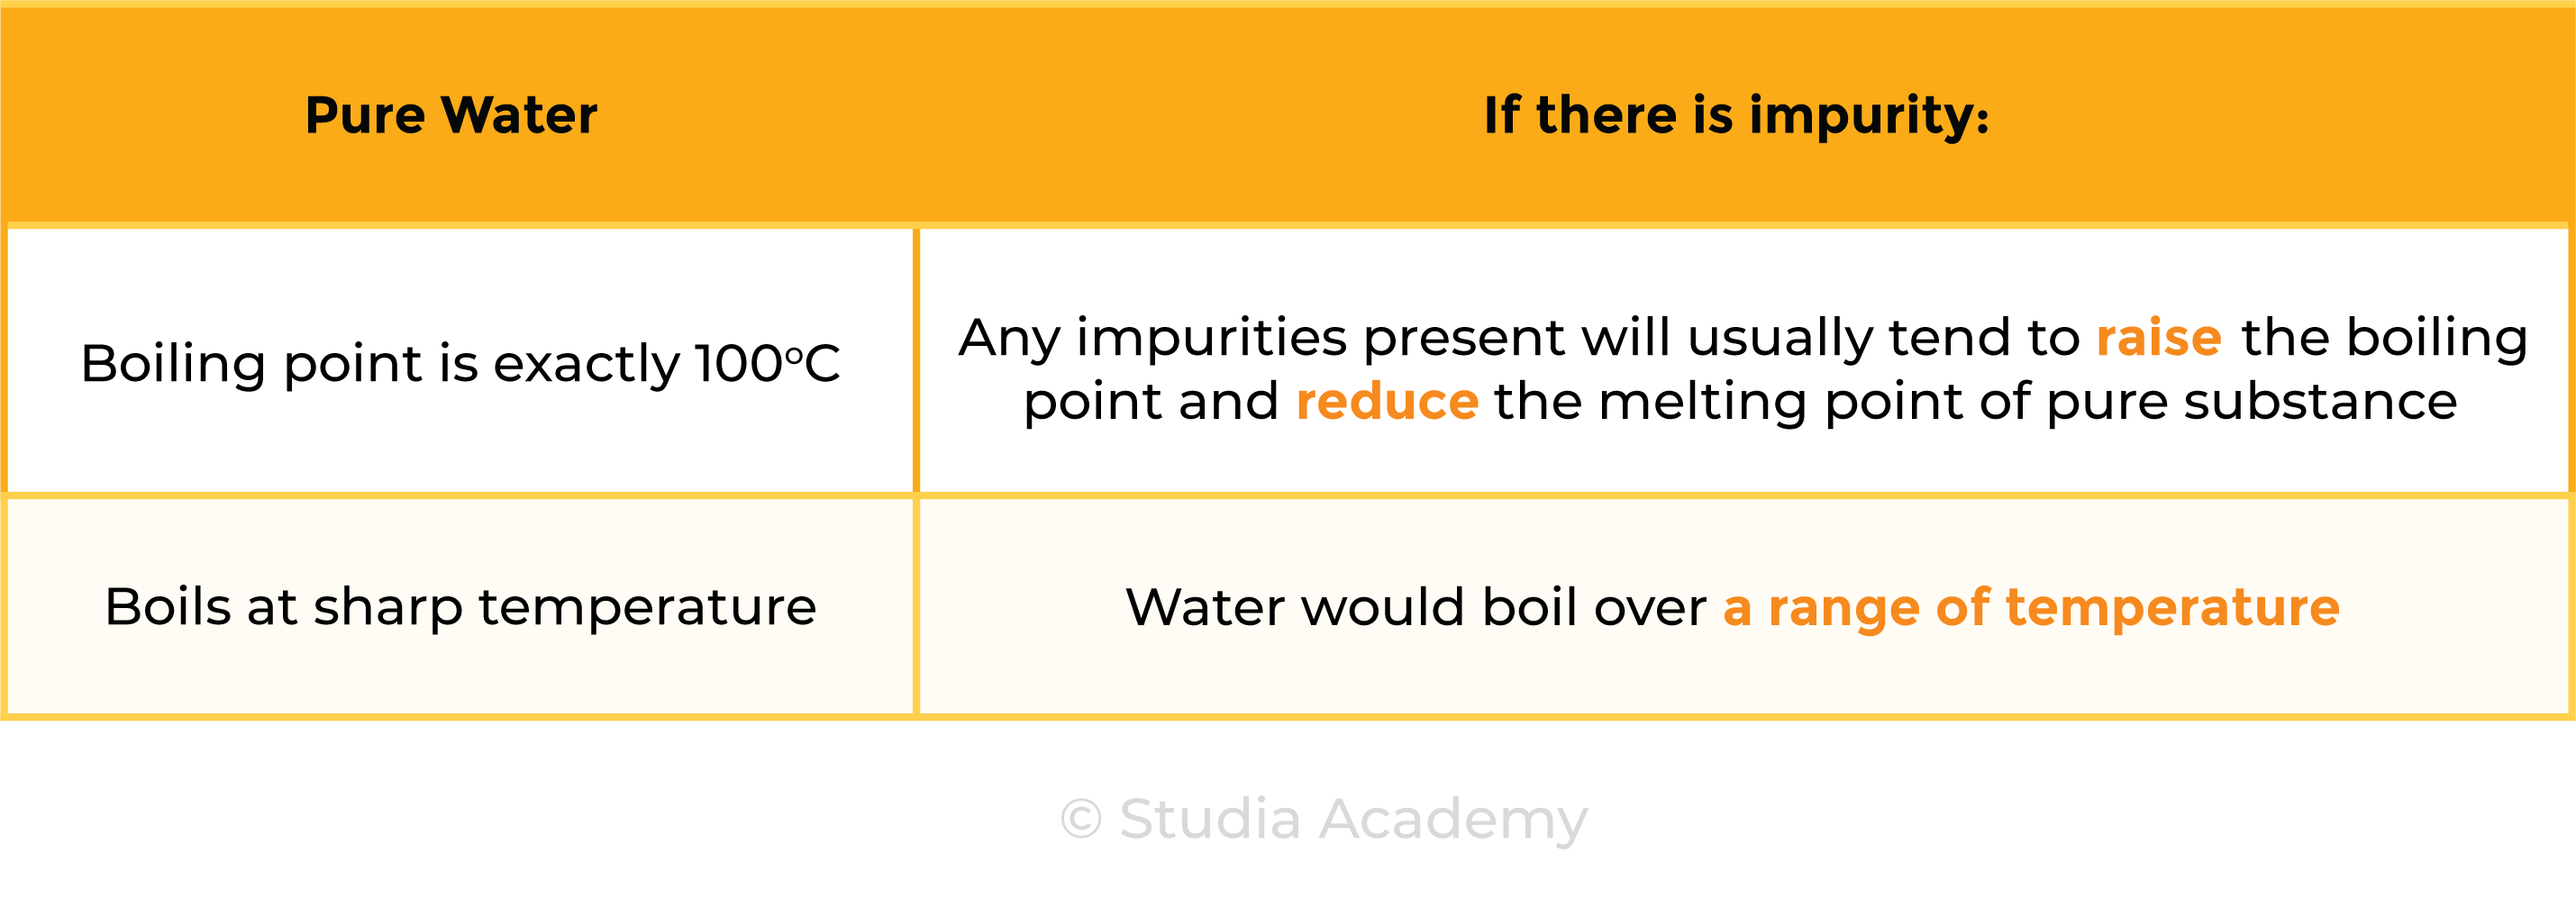 edexcel_igcse_chemistry_topic 17 tables_chemical tests_005_physical test for pure water